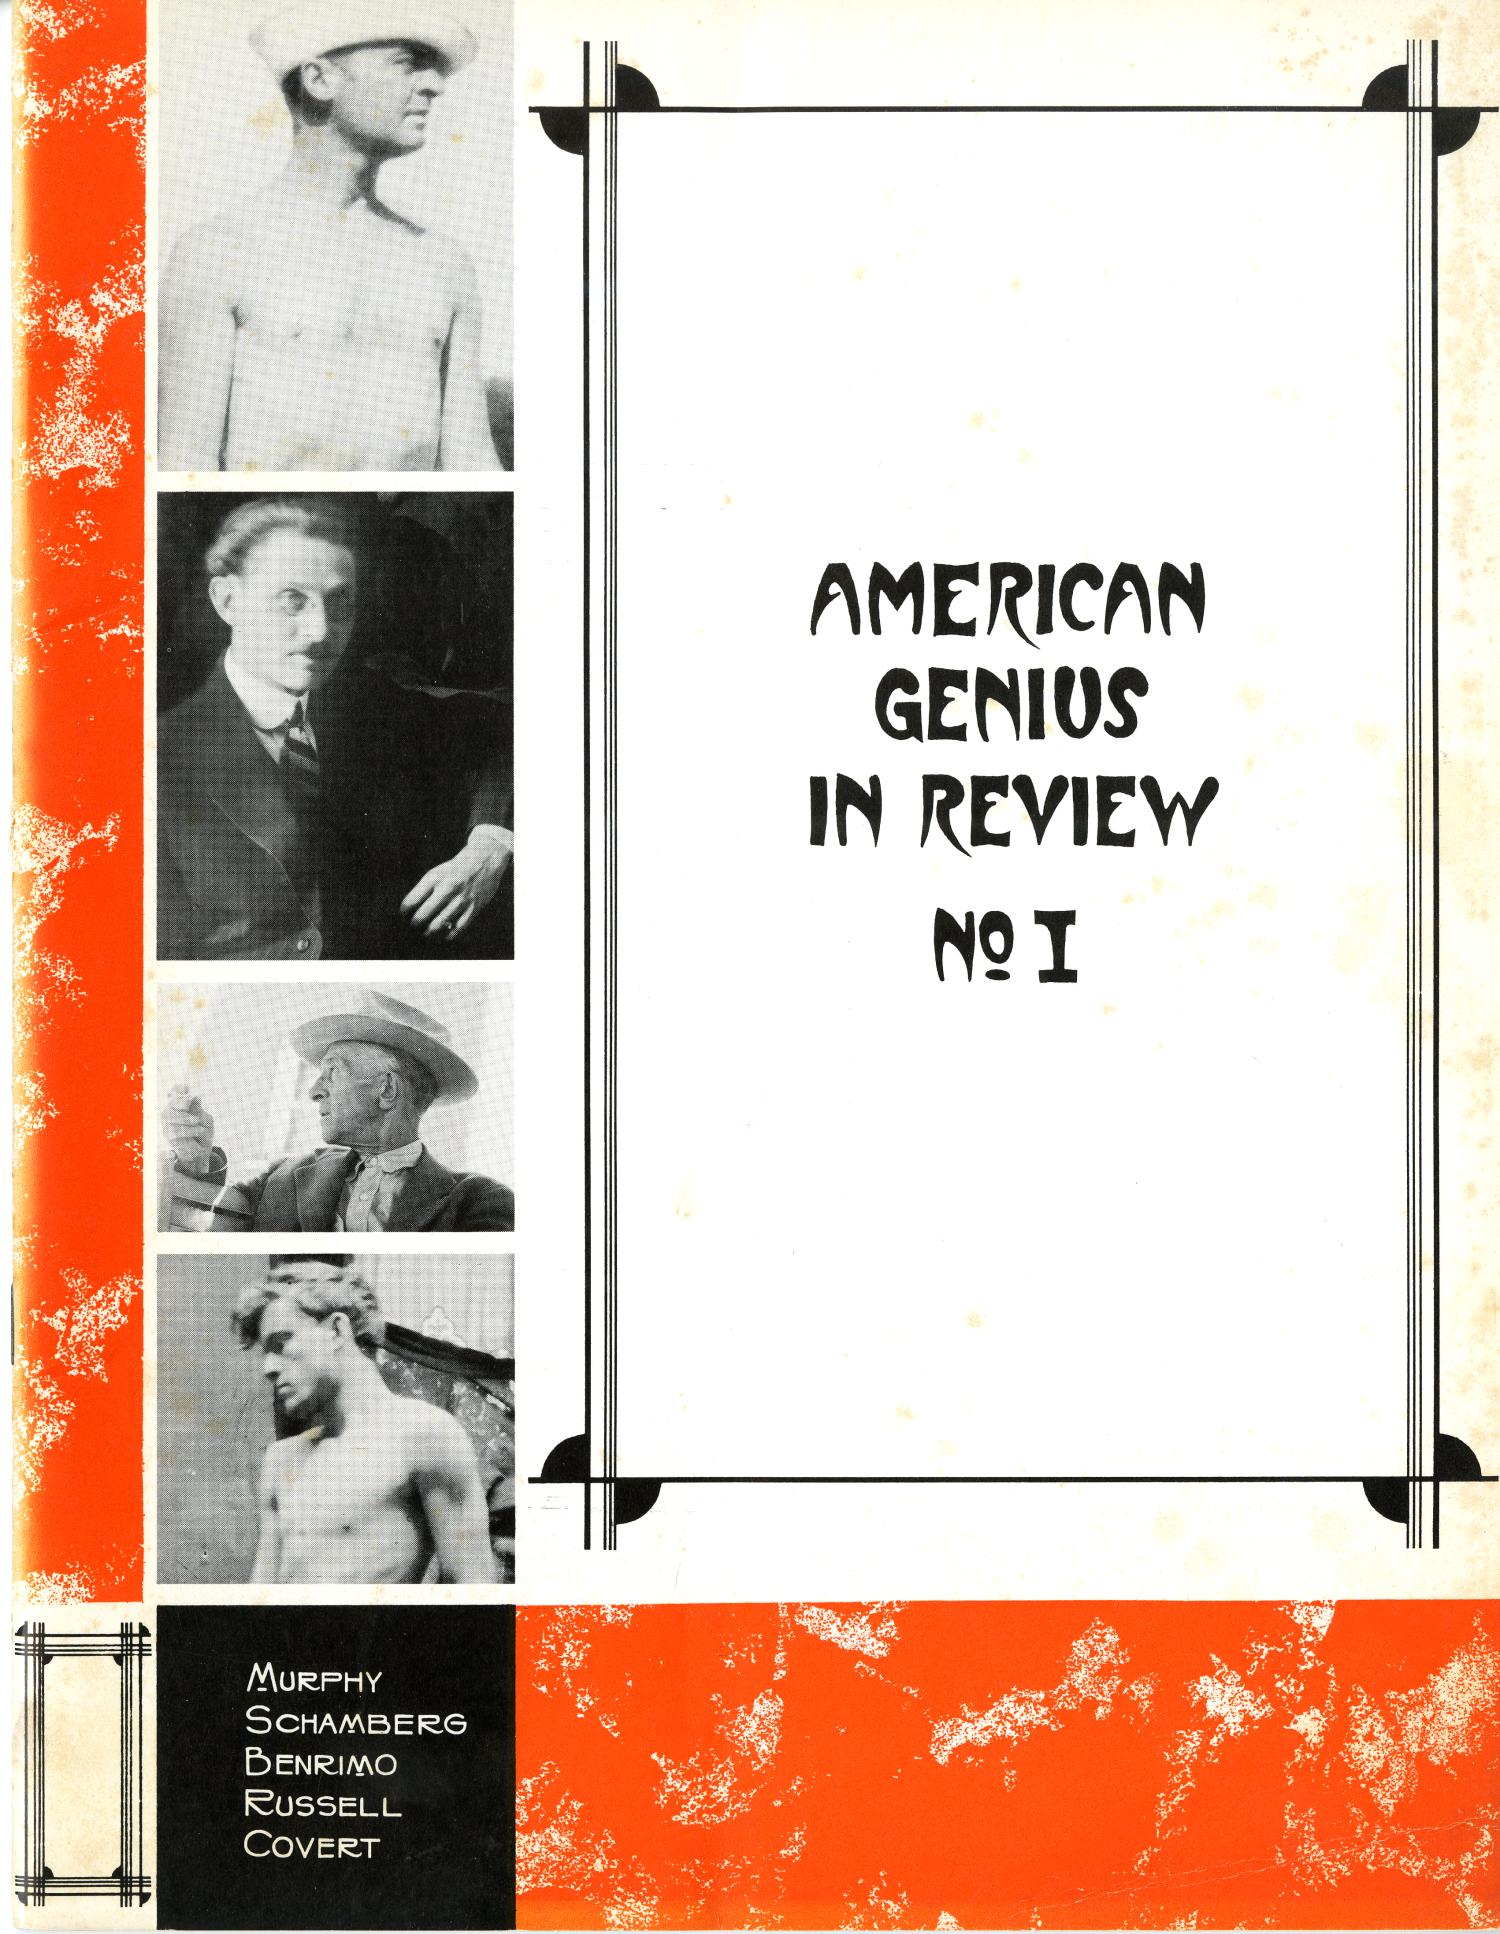 American Genius in Review No. I
                                                
                                                    Front Cover
                                                